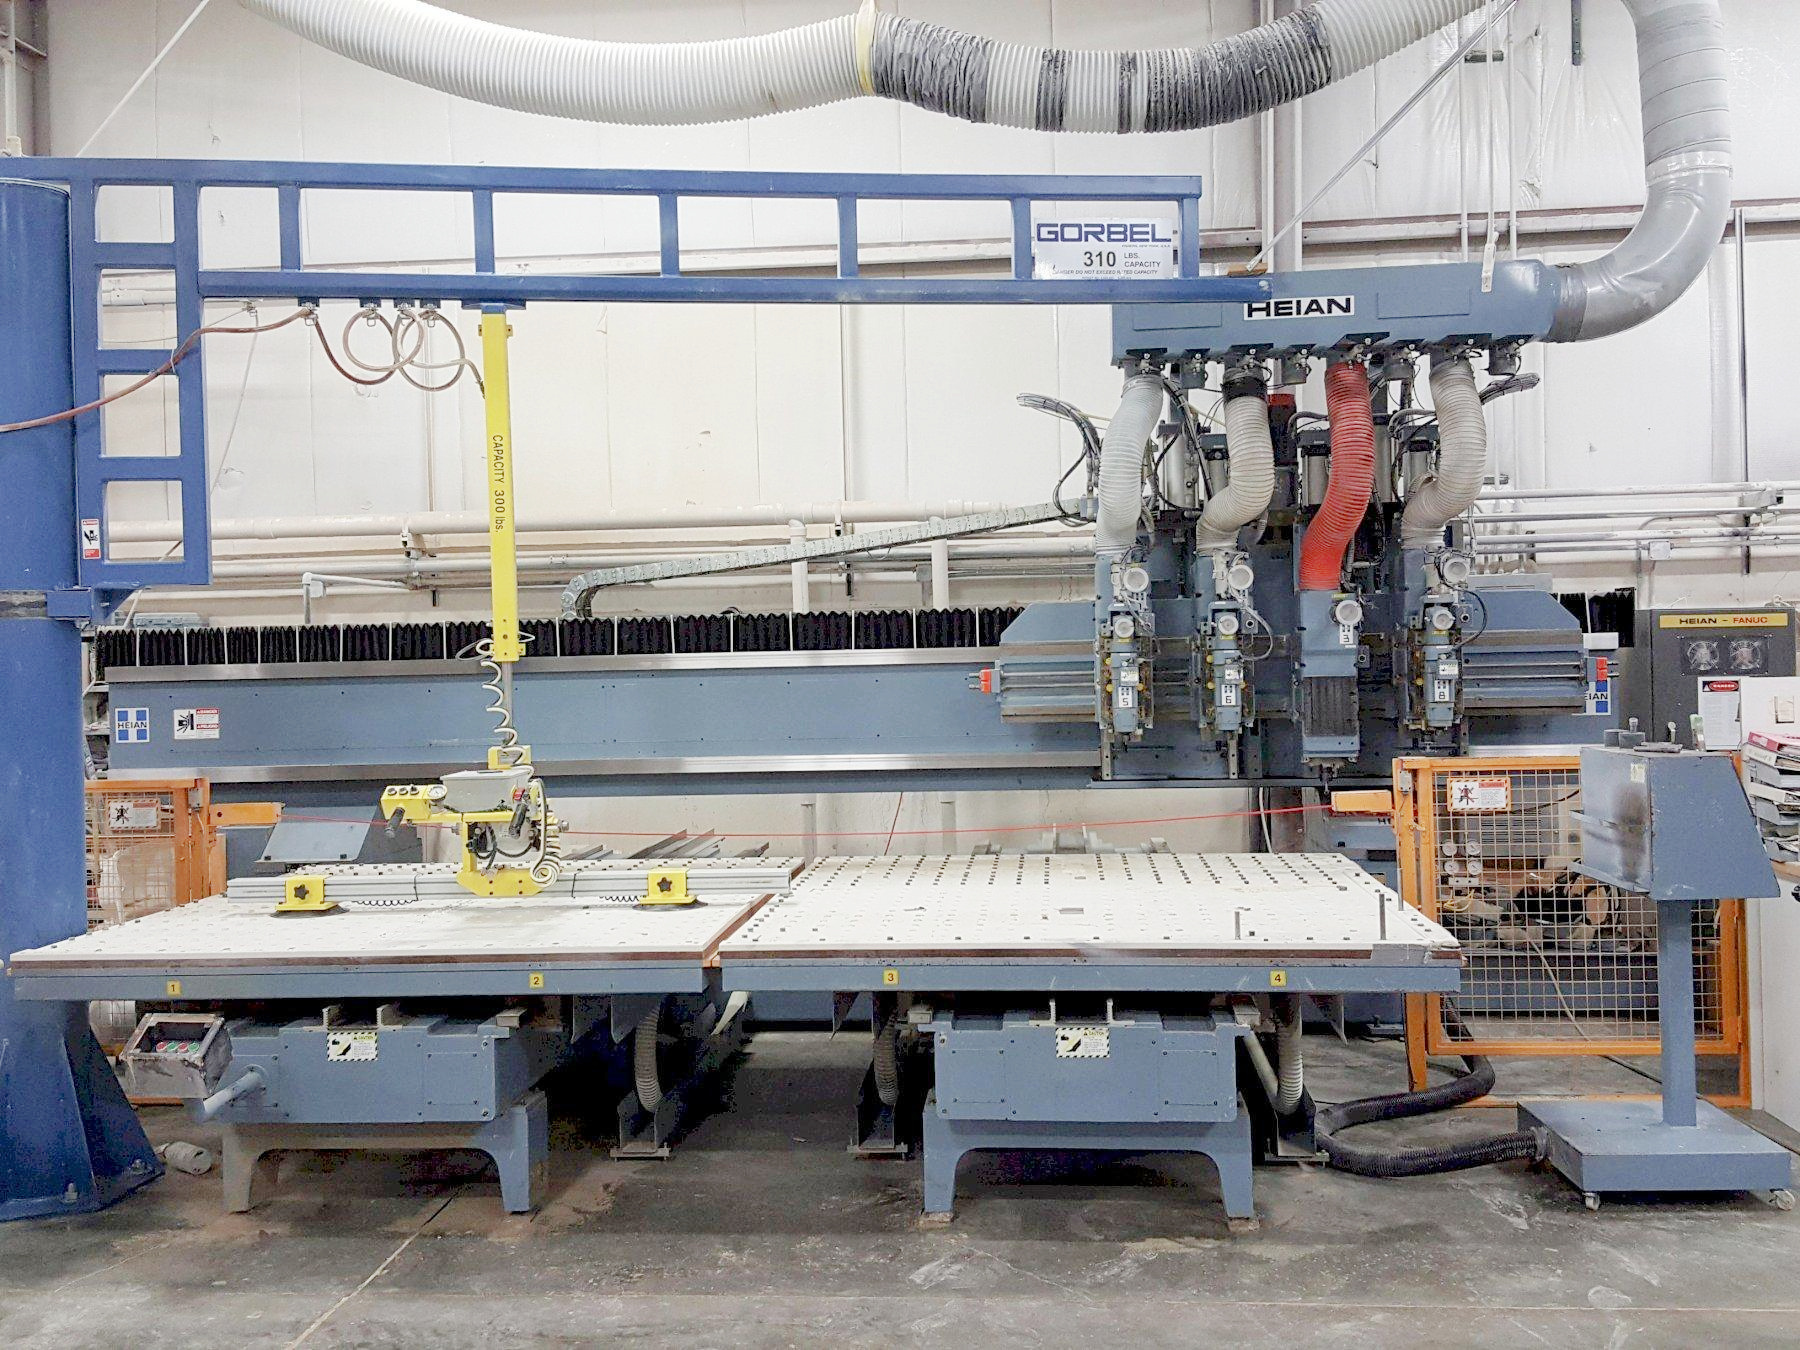 Heian Model #ZR-442P CNC Twin Moving Matrix Table Router (used) Item # UE-081721D (Ohio)